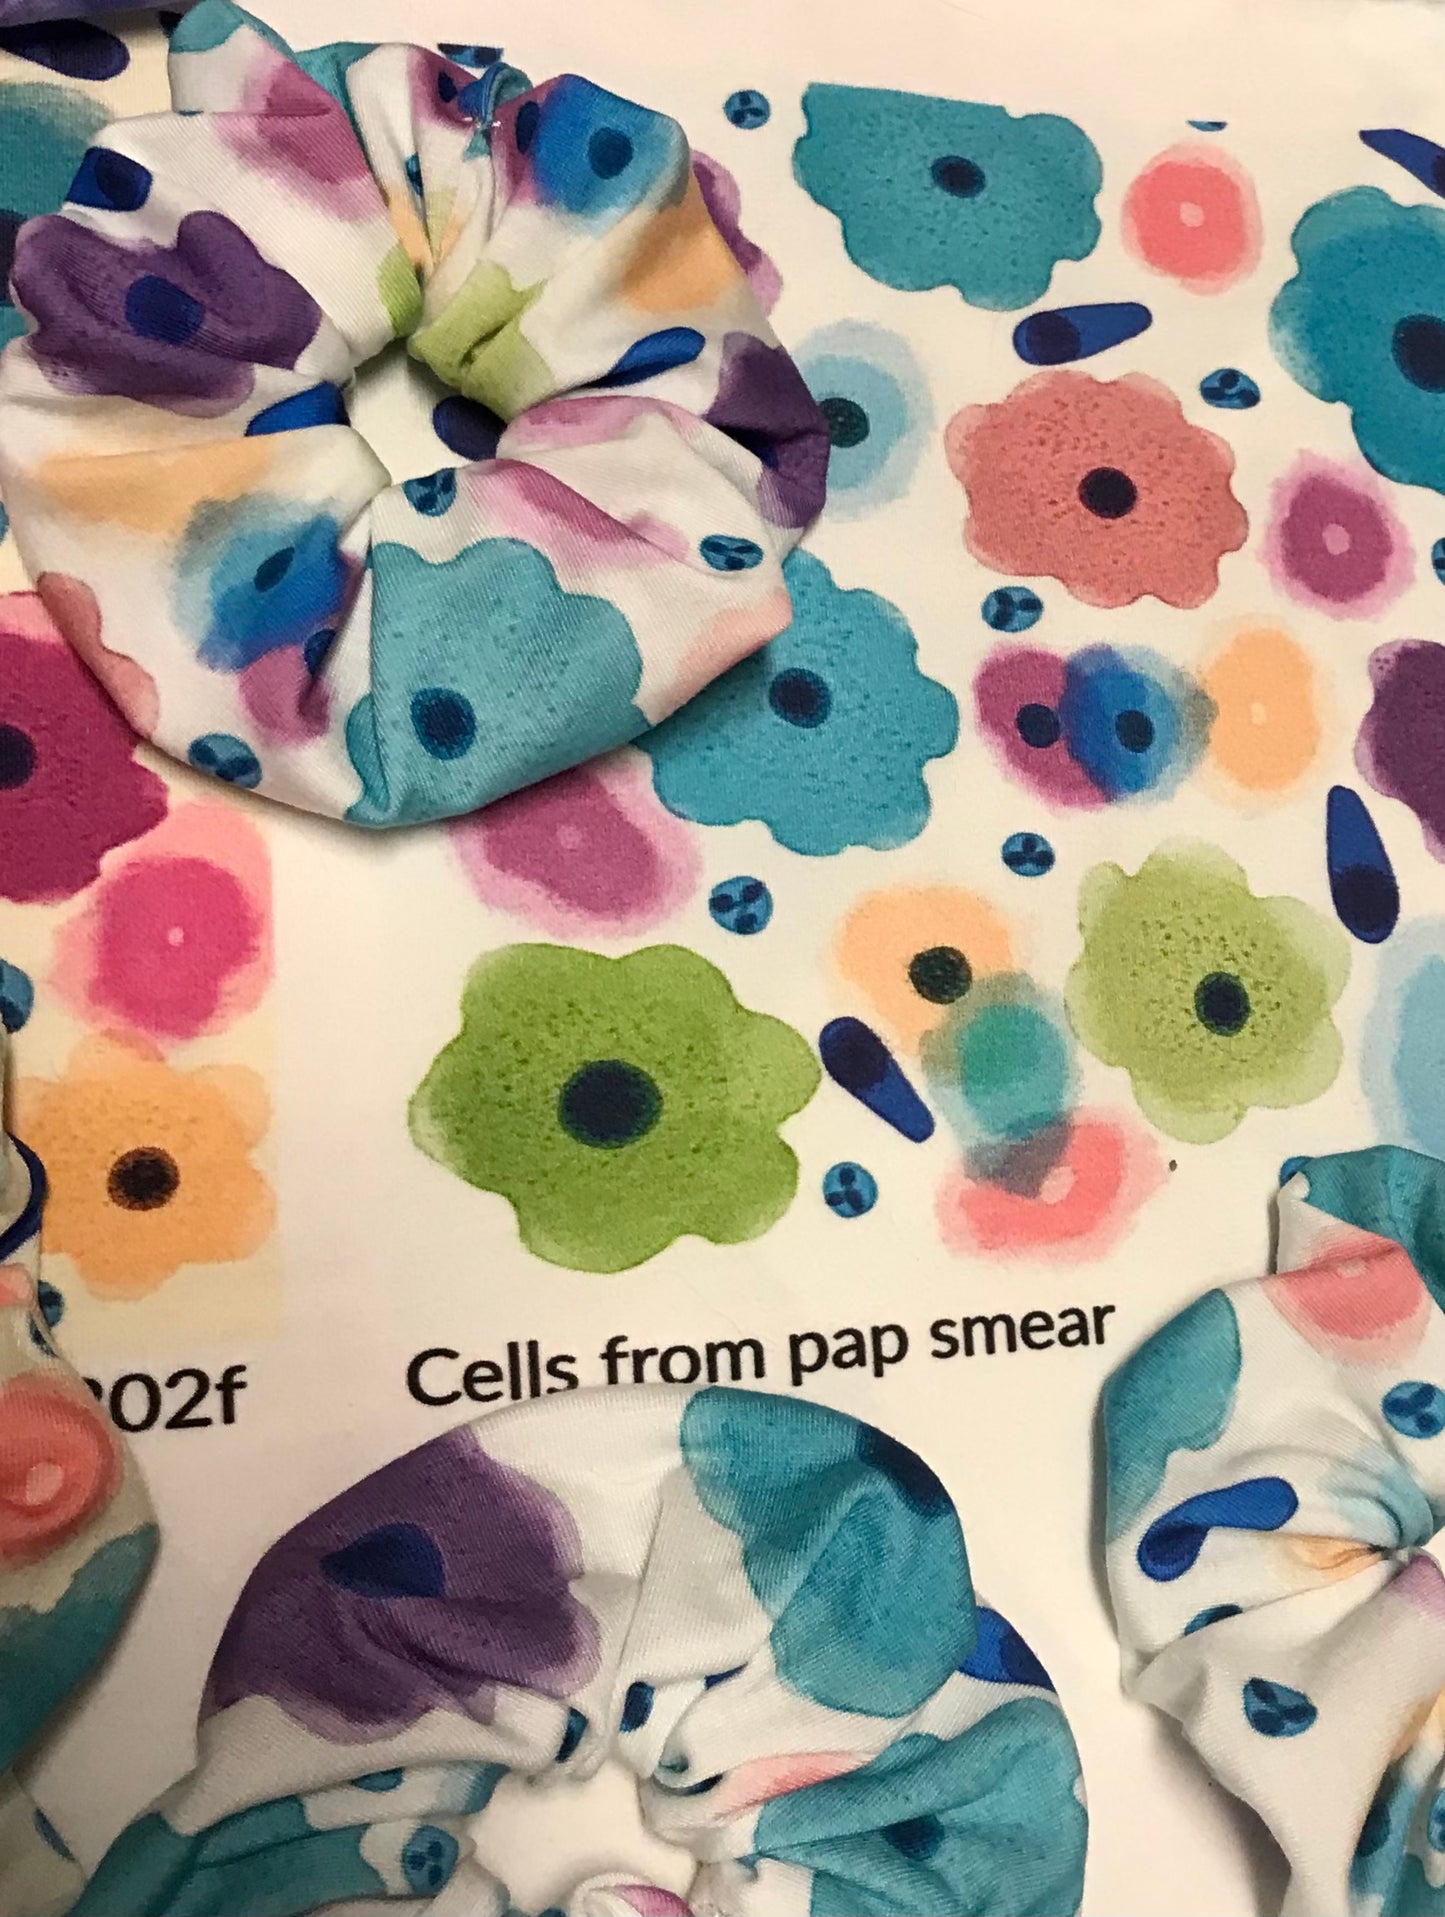 Pap smear cells with WBC - hair scrunchies